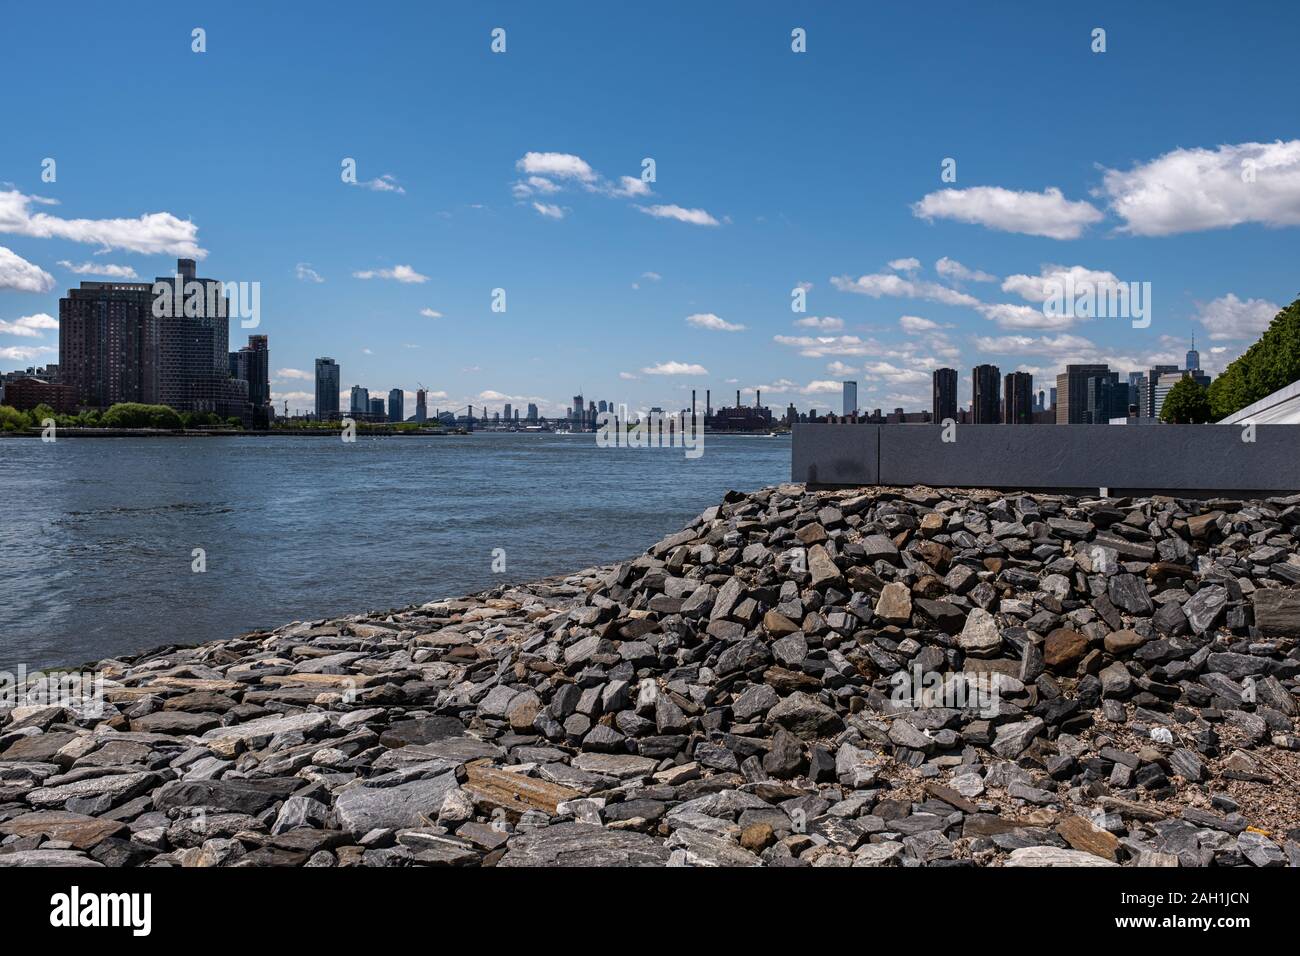 New York City - USA - May 15 2019: Long Island City apartment buildings view from Roosevelt Island Stock Photo